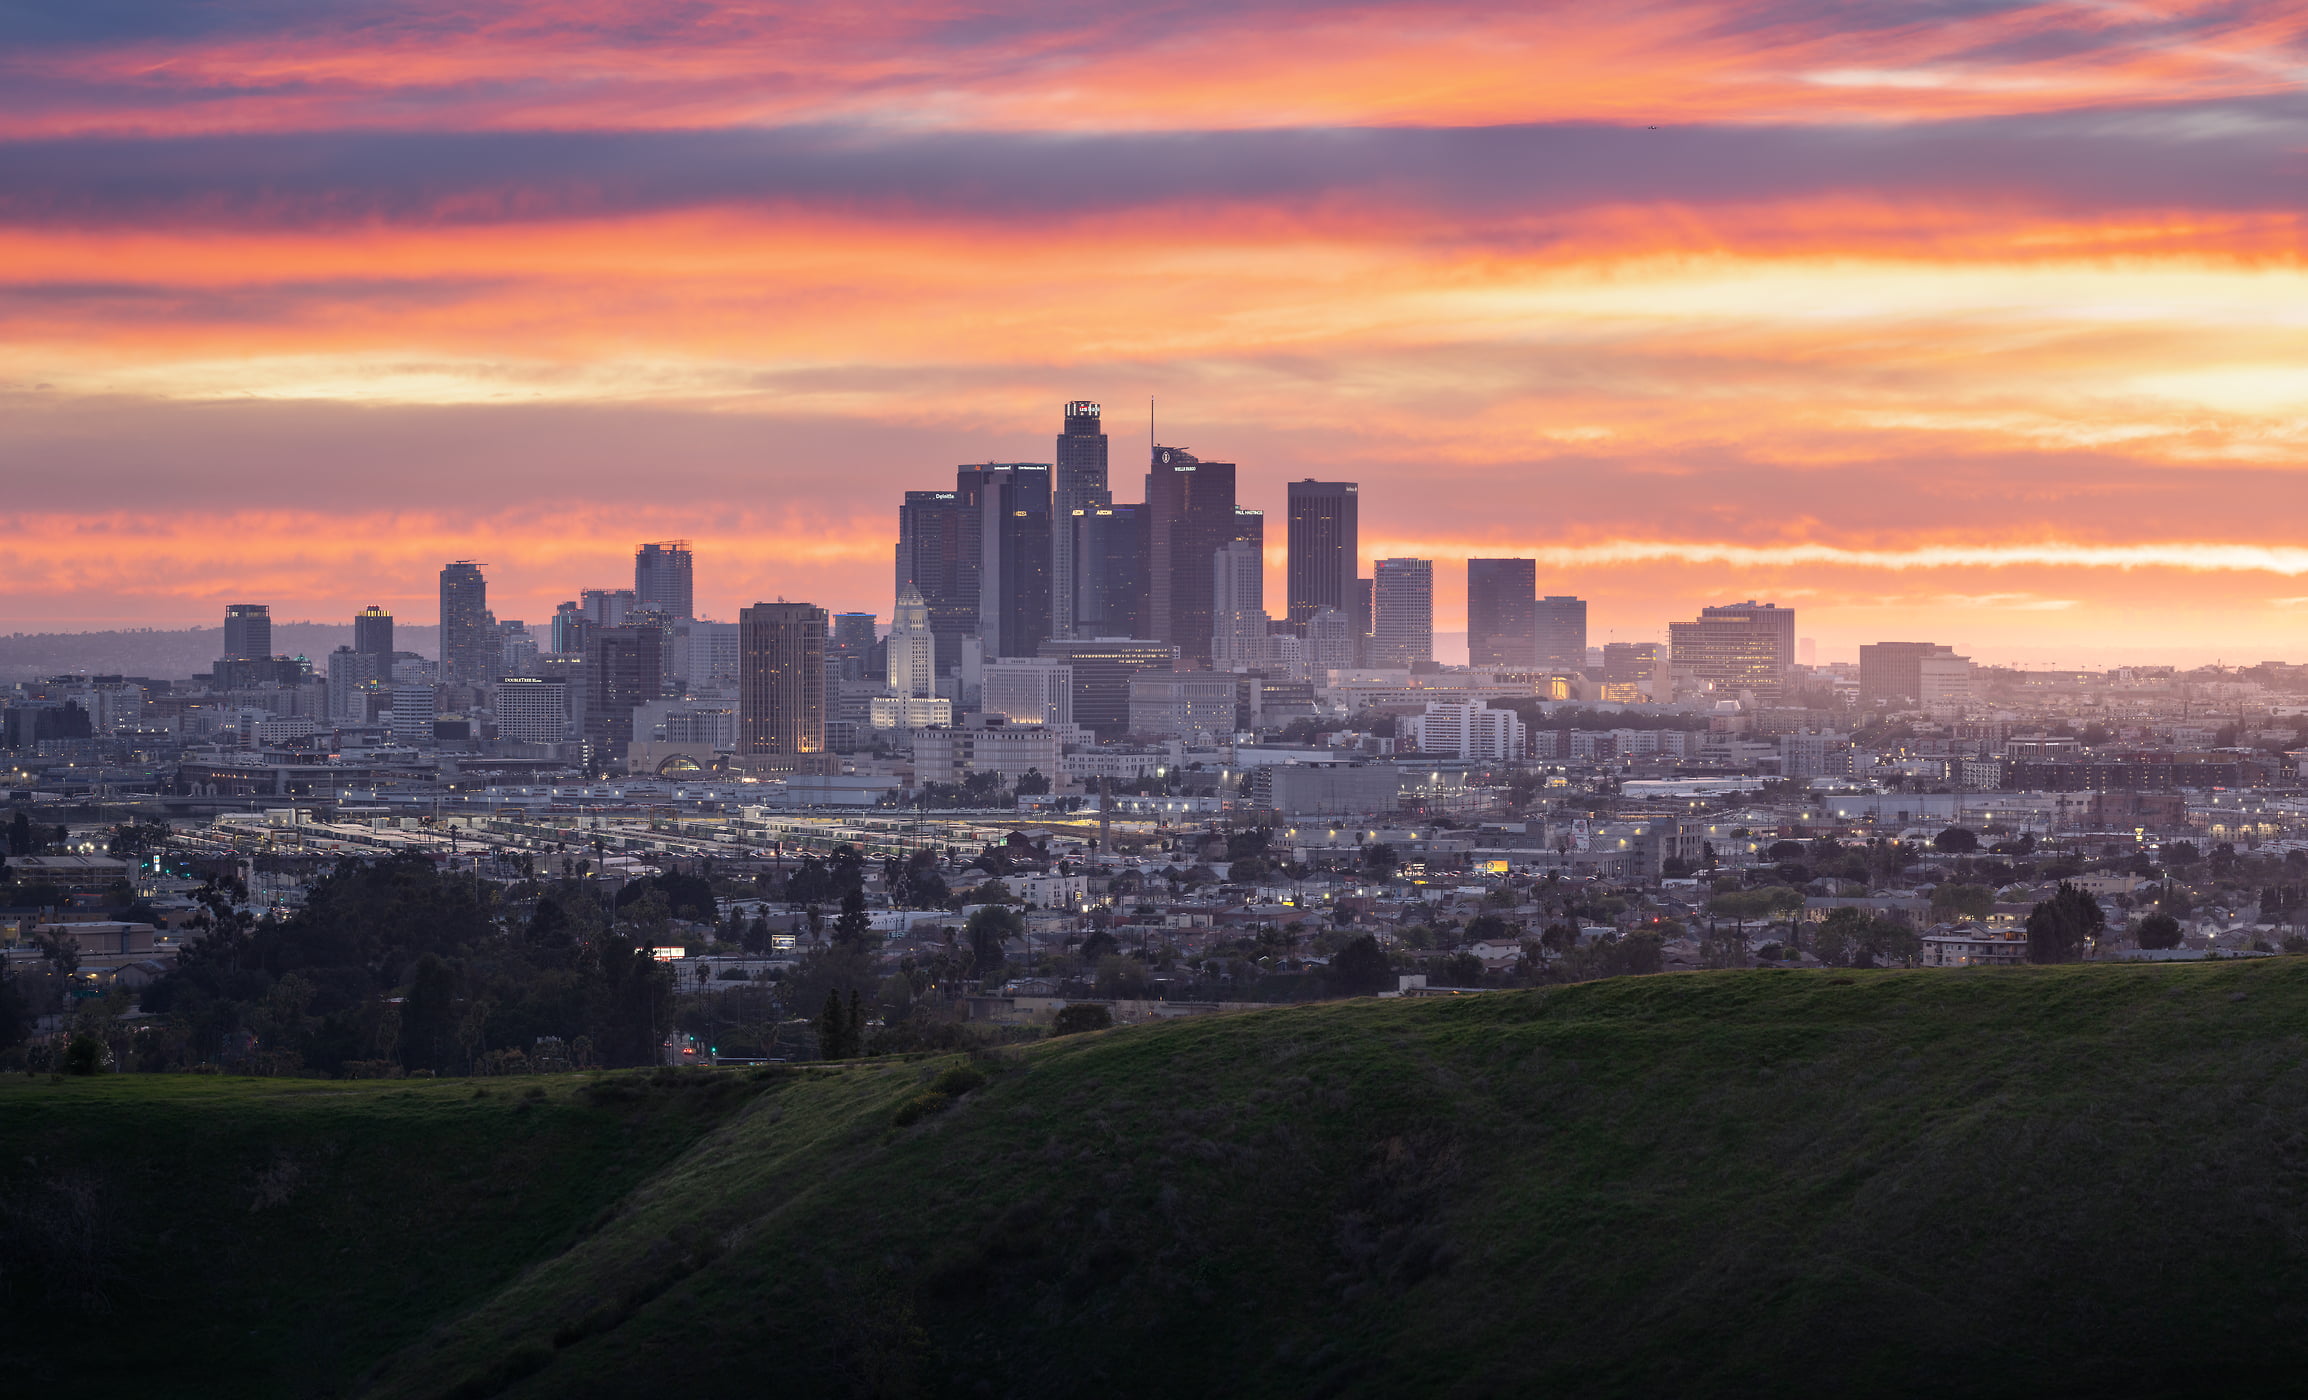 194 megapixels! A very high resolution, large-format VAST photo print of Los Angeles at sunset; skyline photograph created by Jeff Lewis in Los Angeles, California.